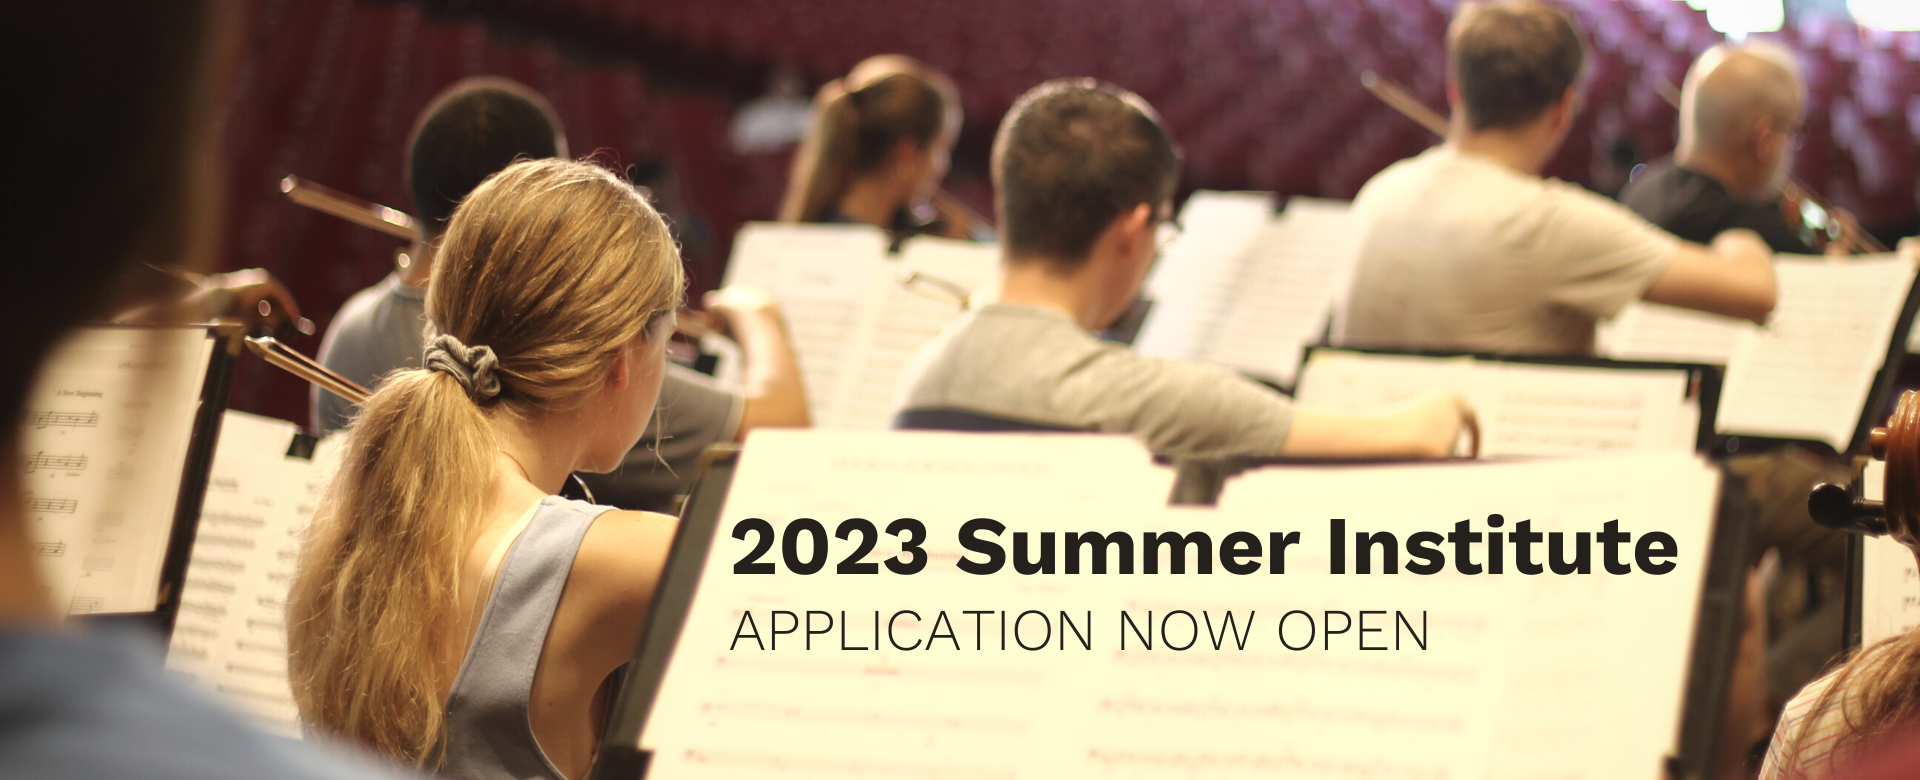 2023 Application Now Open